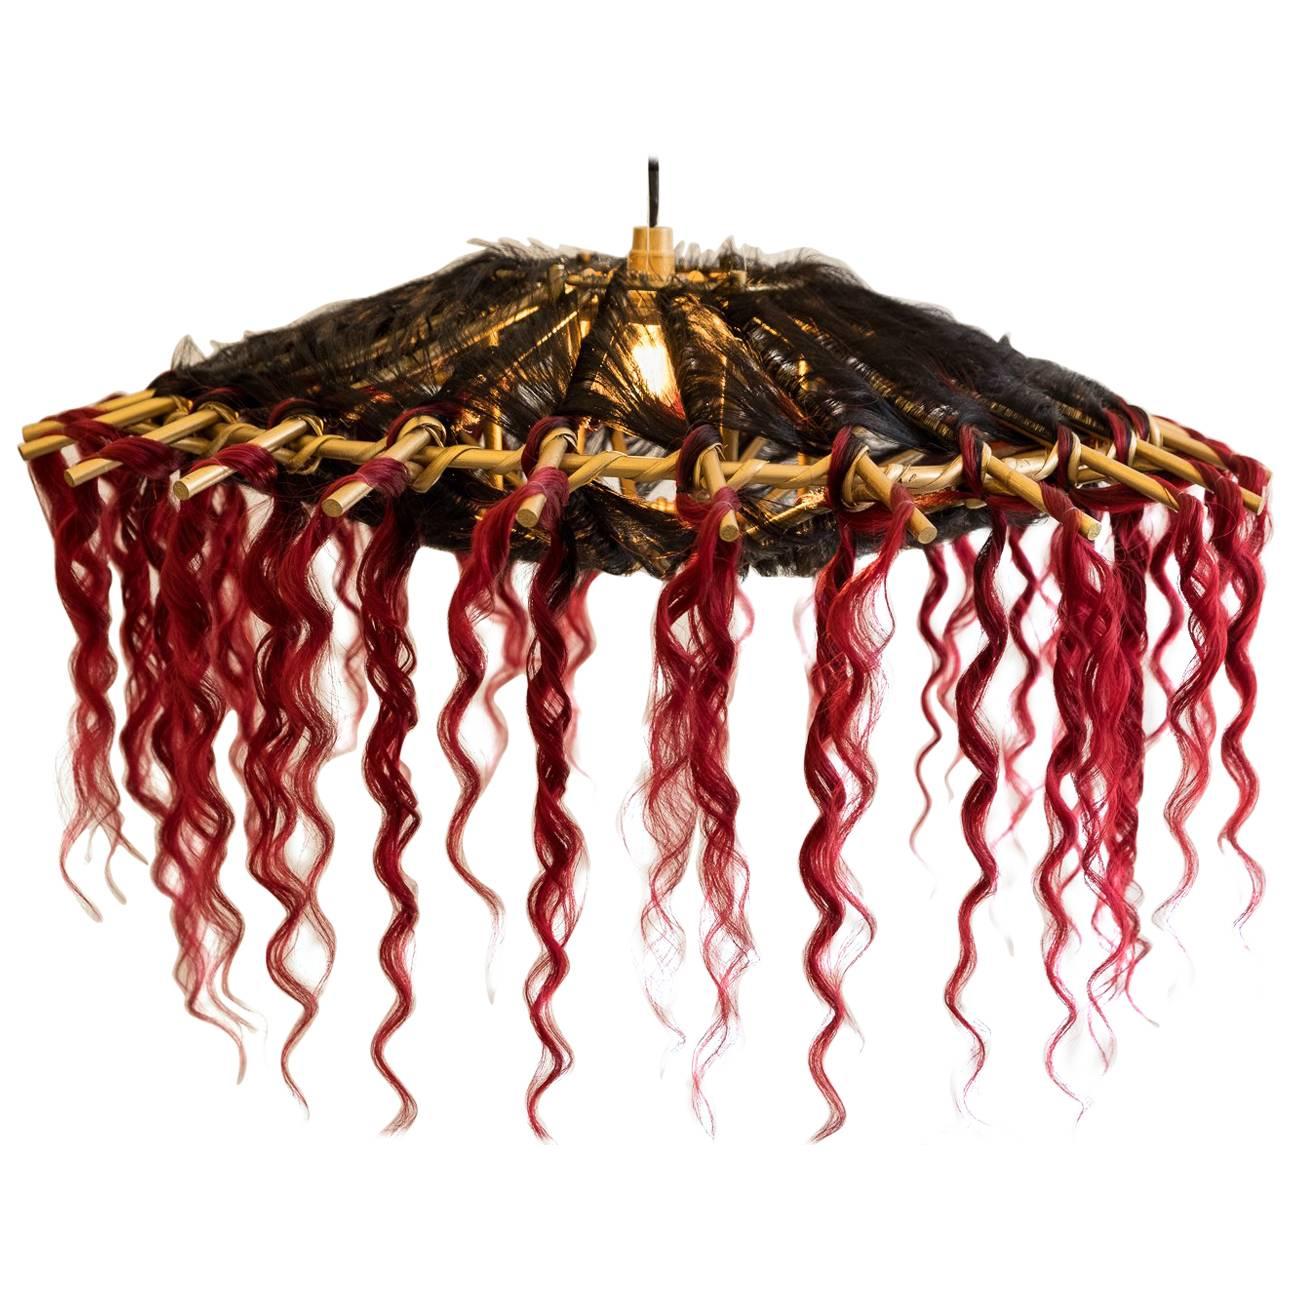 Hanging Lamp, Rattan Chandelier and Synthetic Fibers, Unique Pieces, Art Modern